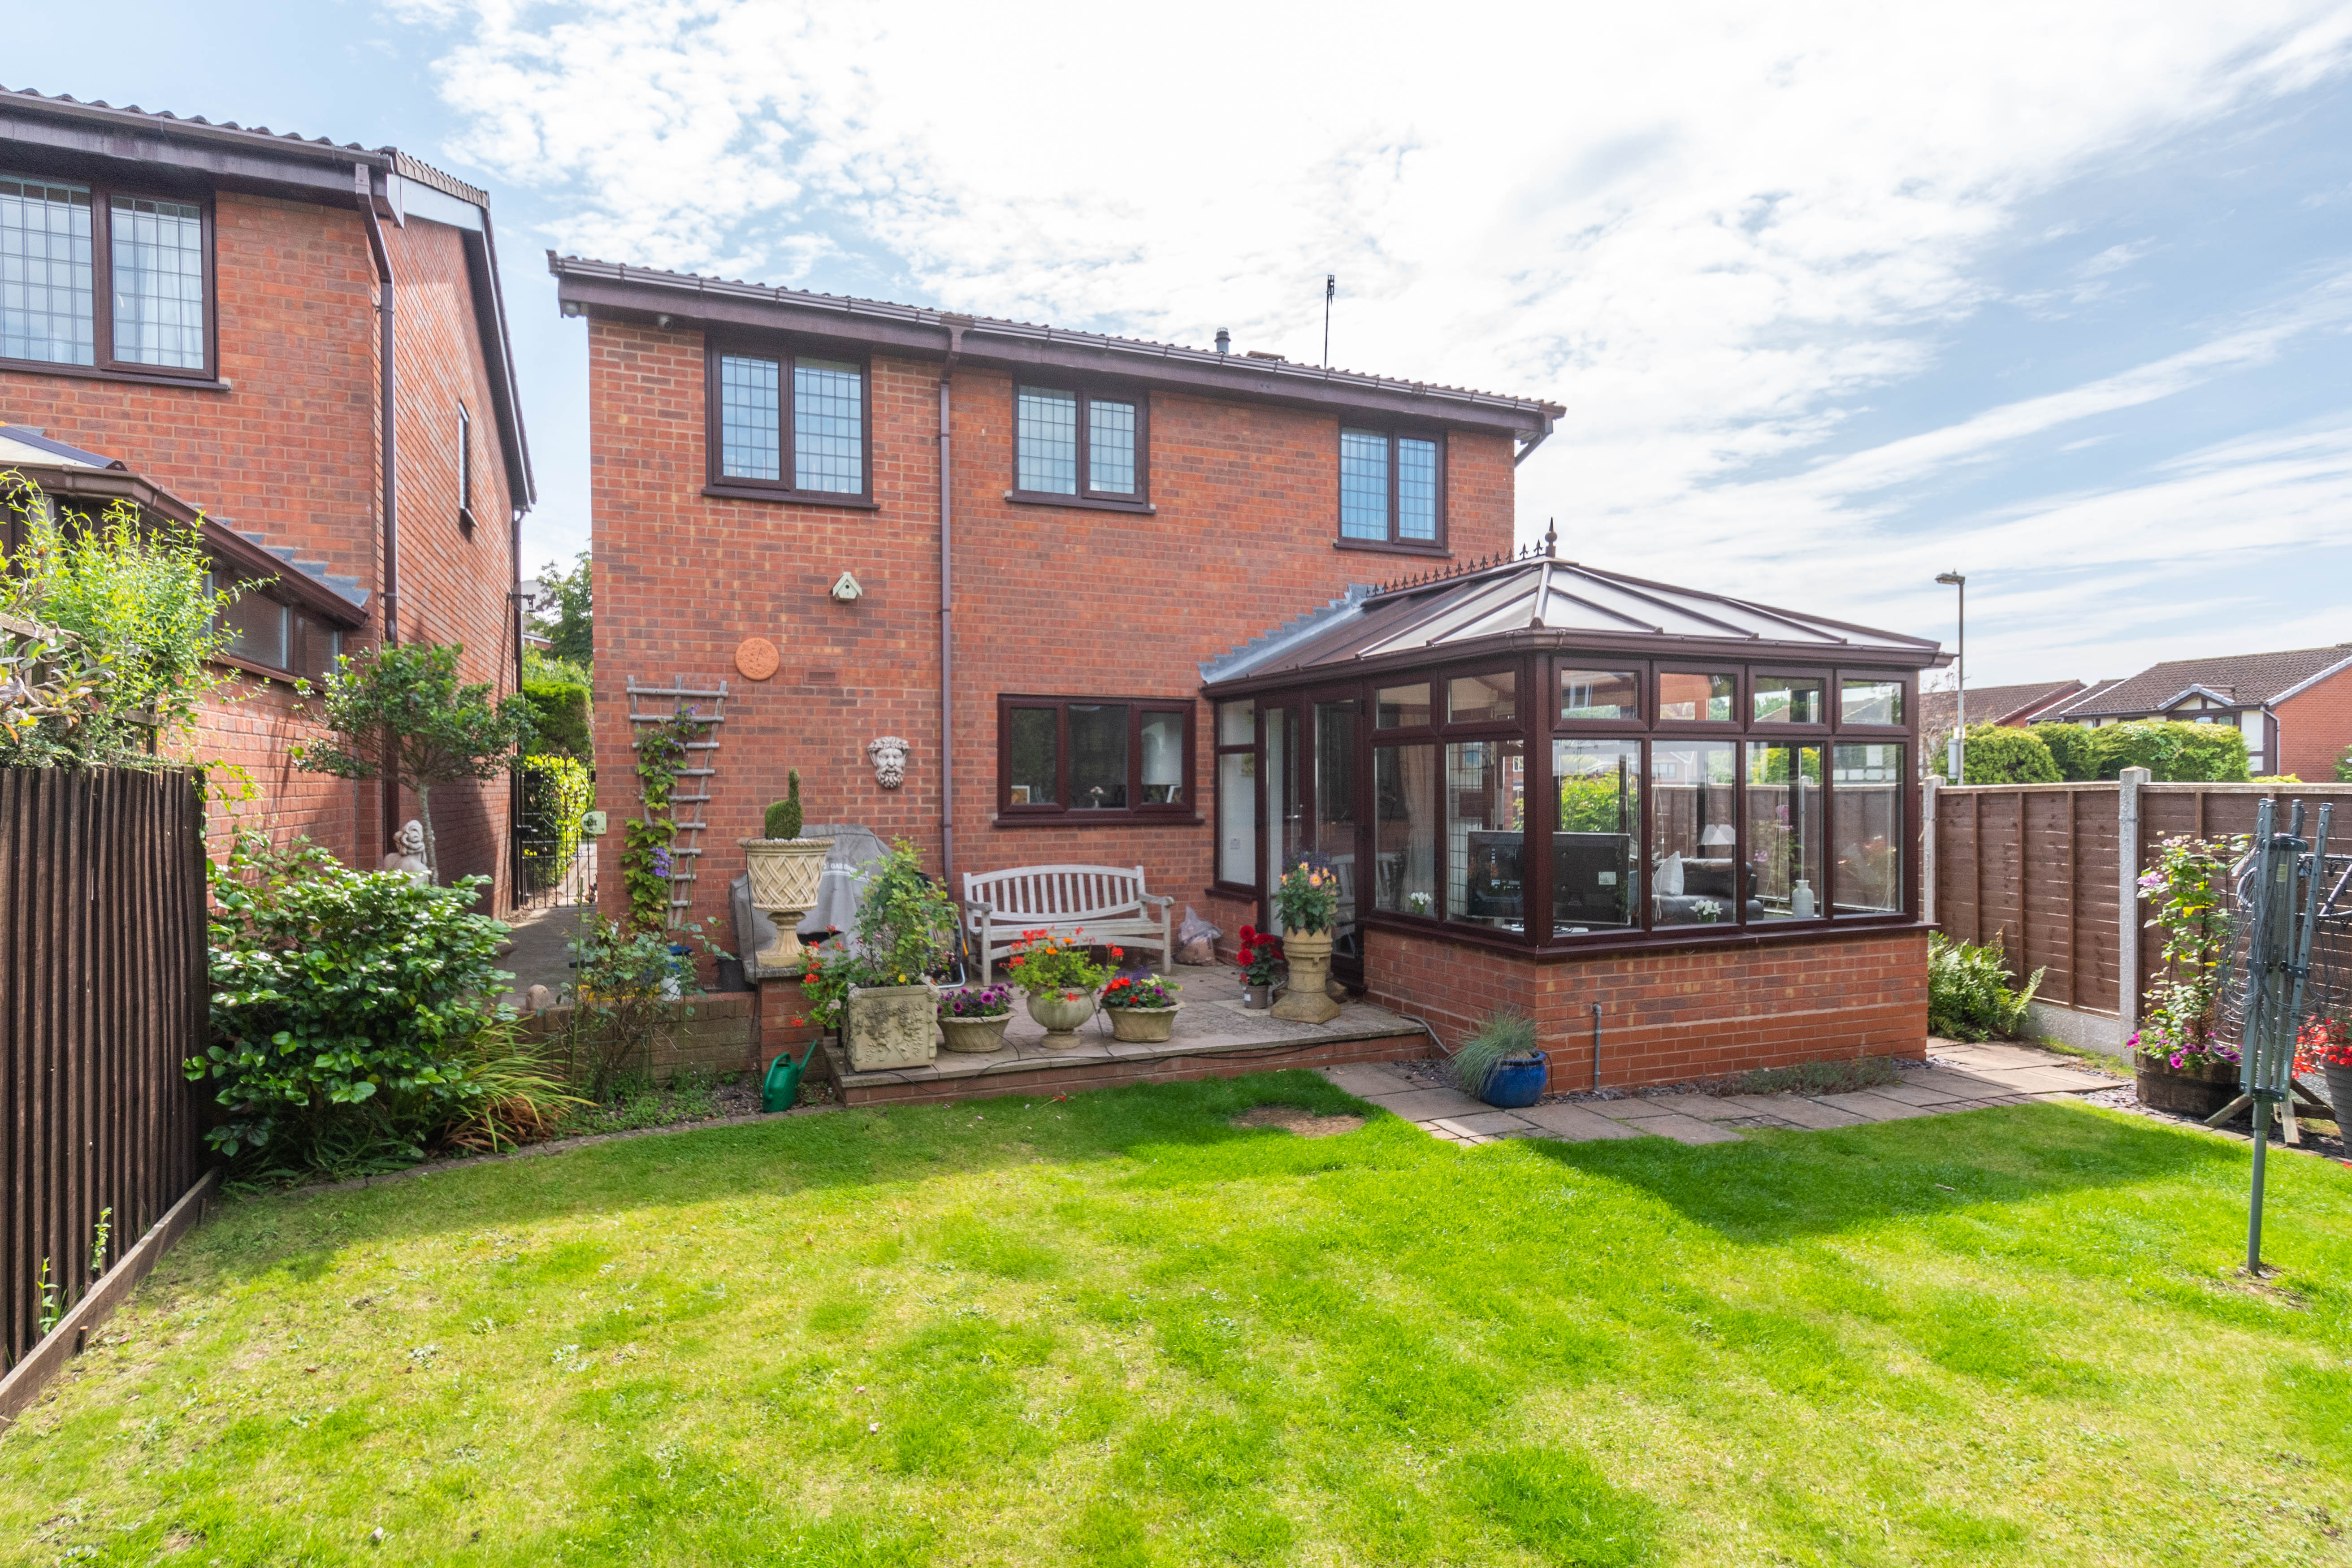 4 bed house for sale in Ashton Park Drive, Brierley Hill  - Property Image 22